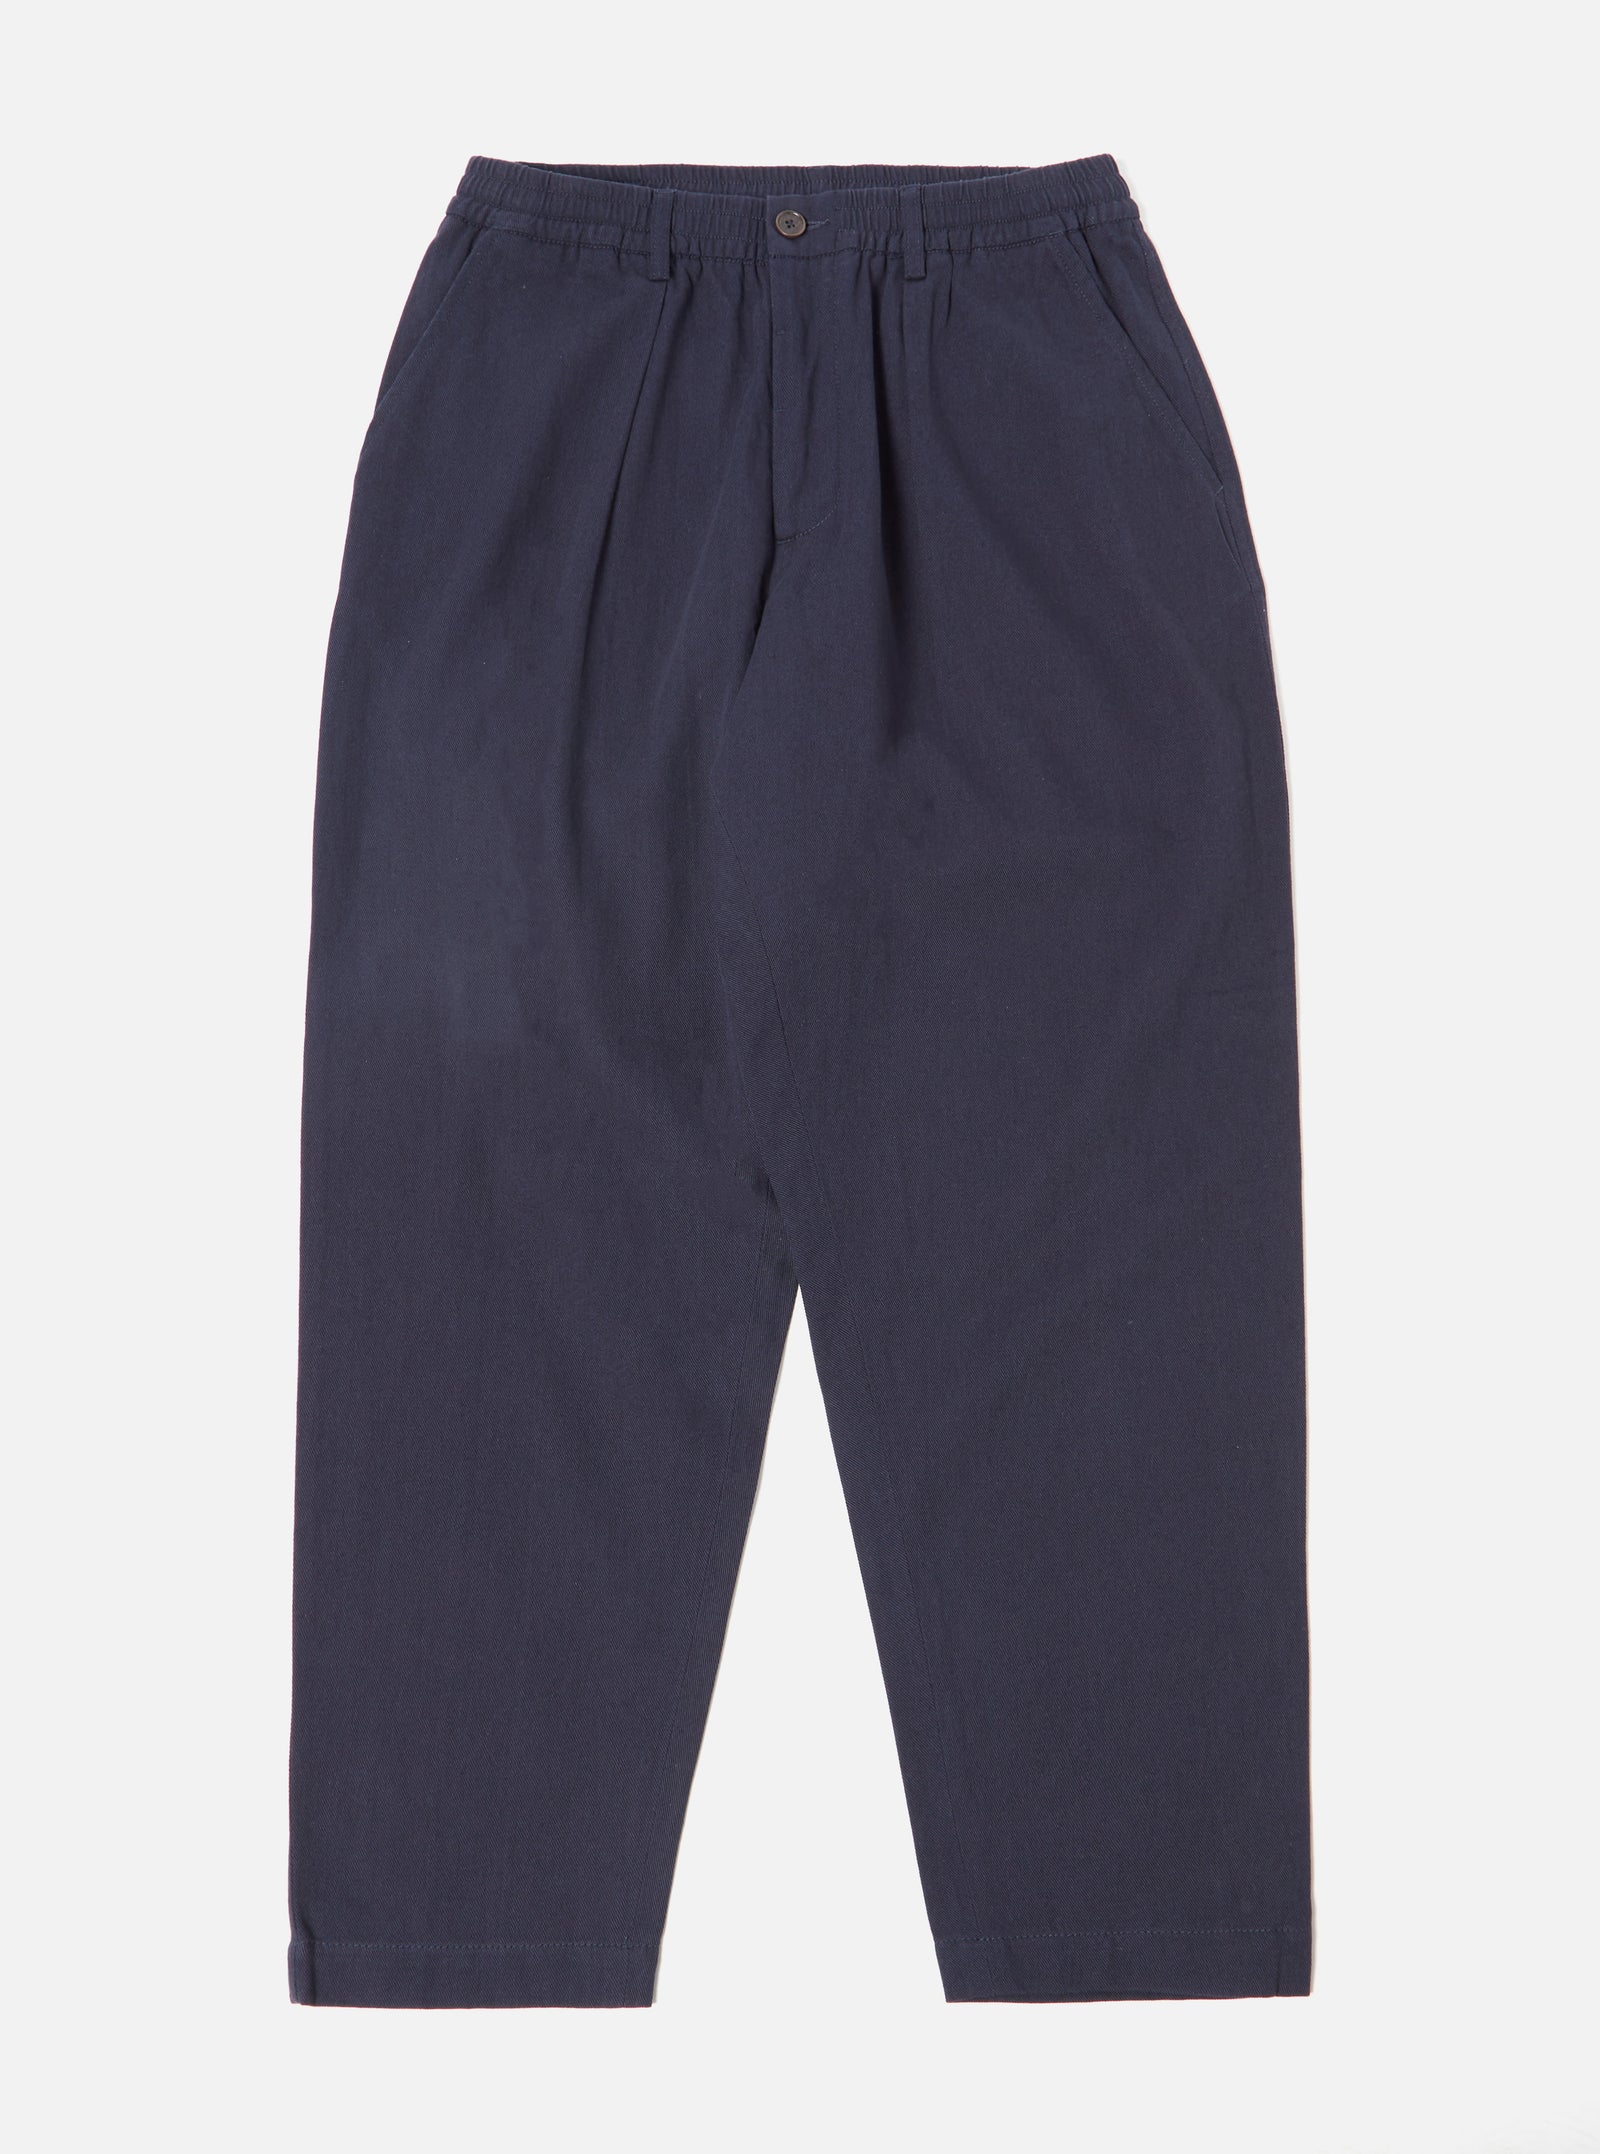 Universal Works Pleated Track Pant in Navy Winter Twill